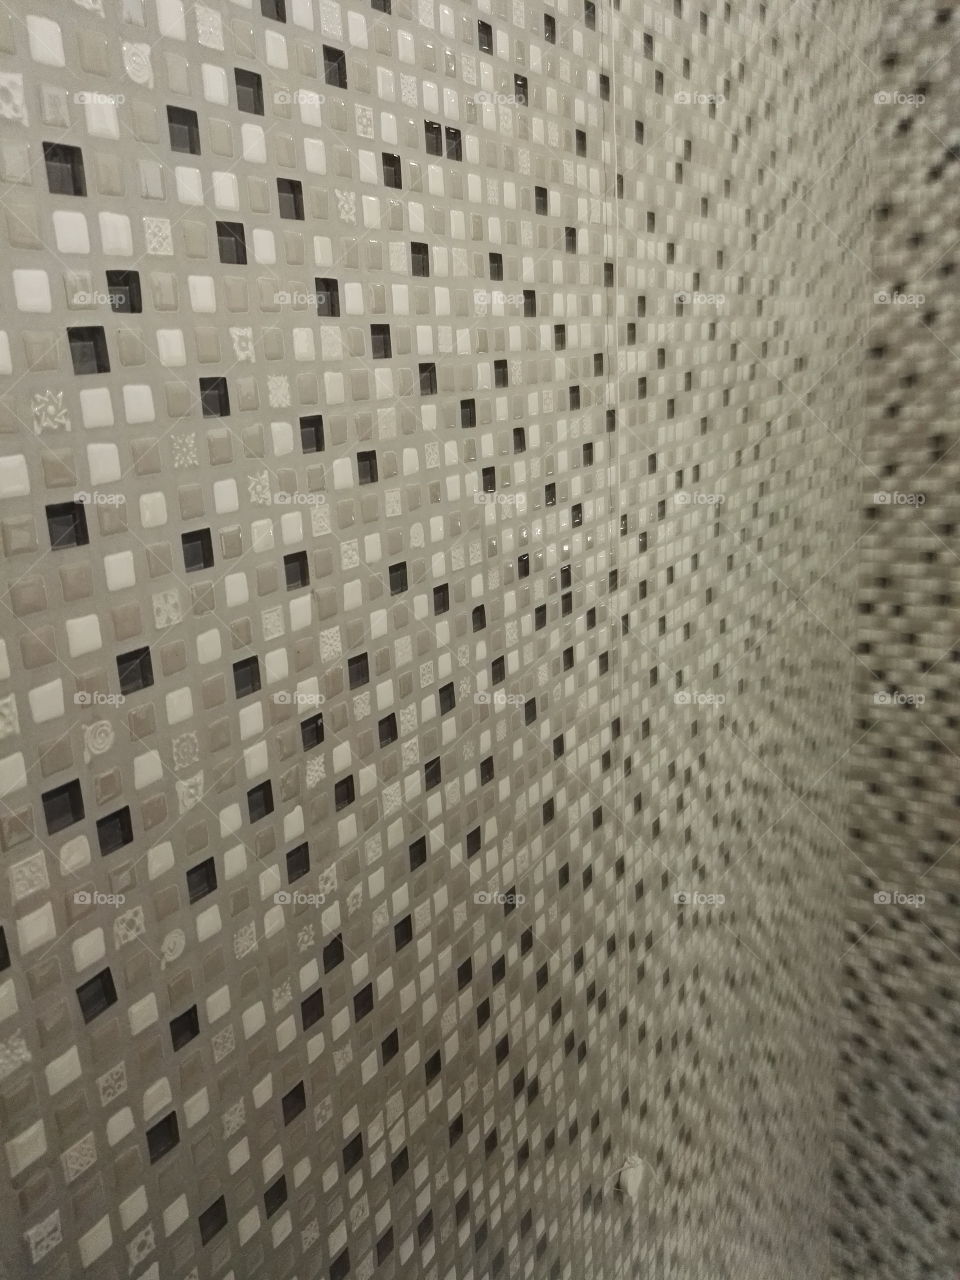 the wall tiles in shades of gray